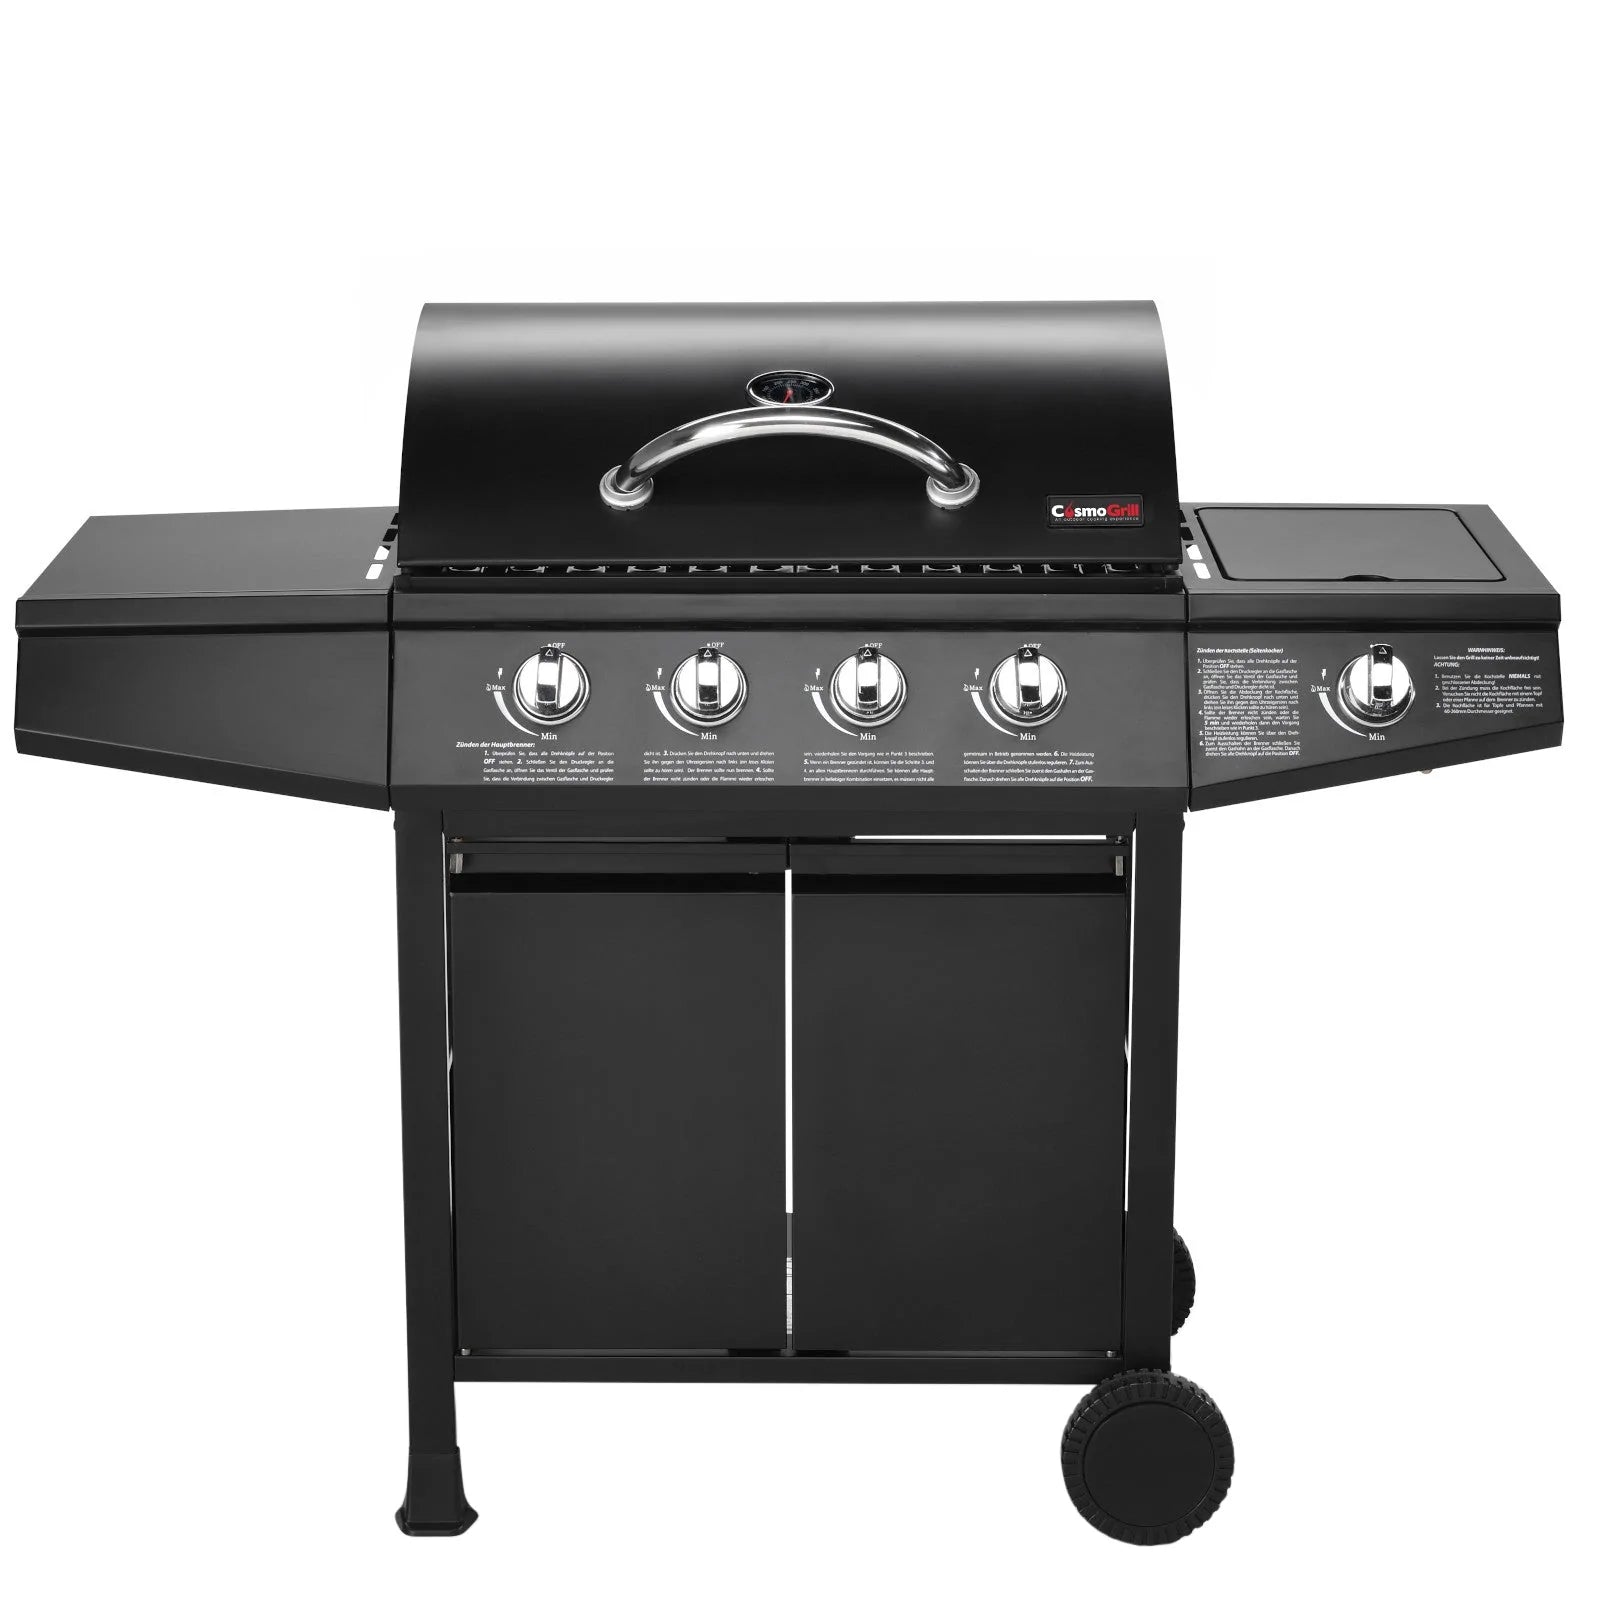 CosmoGrill Original Series 4+1 Gas Barbecue Front View